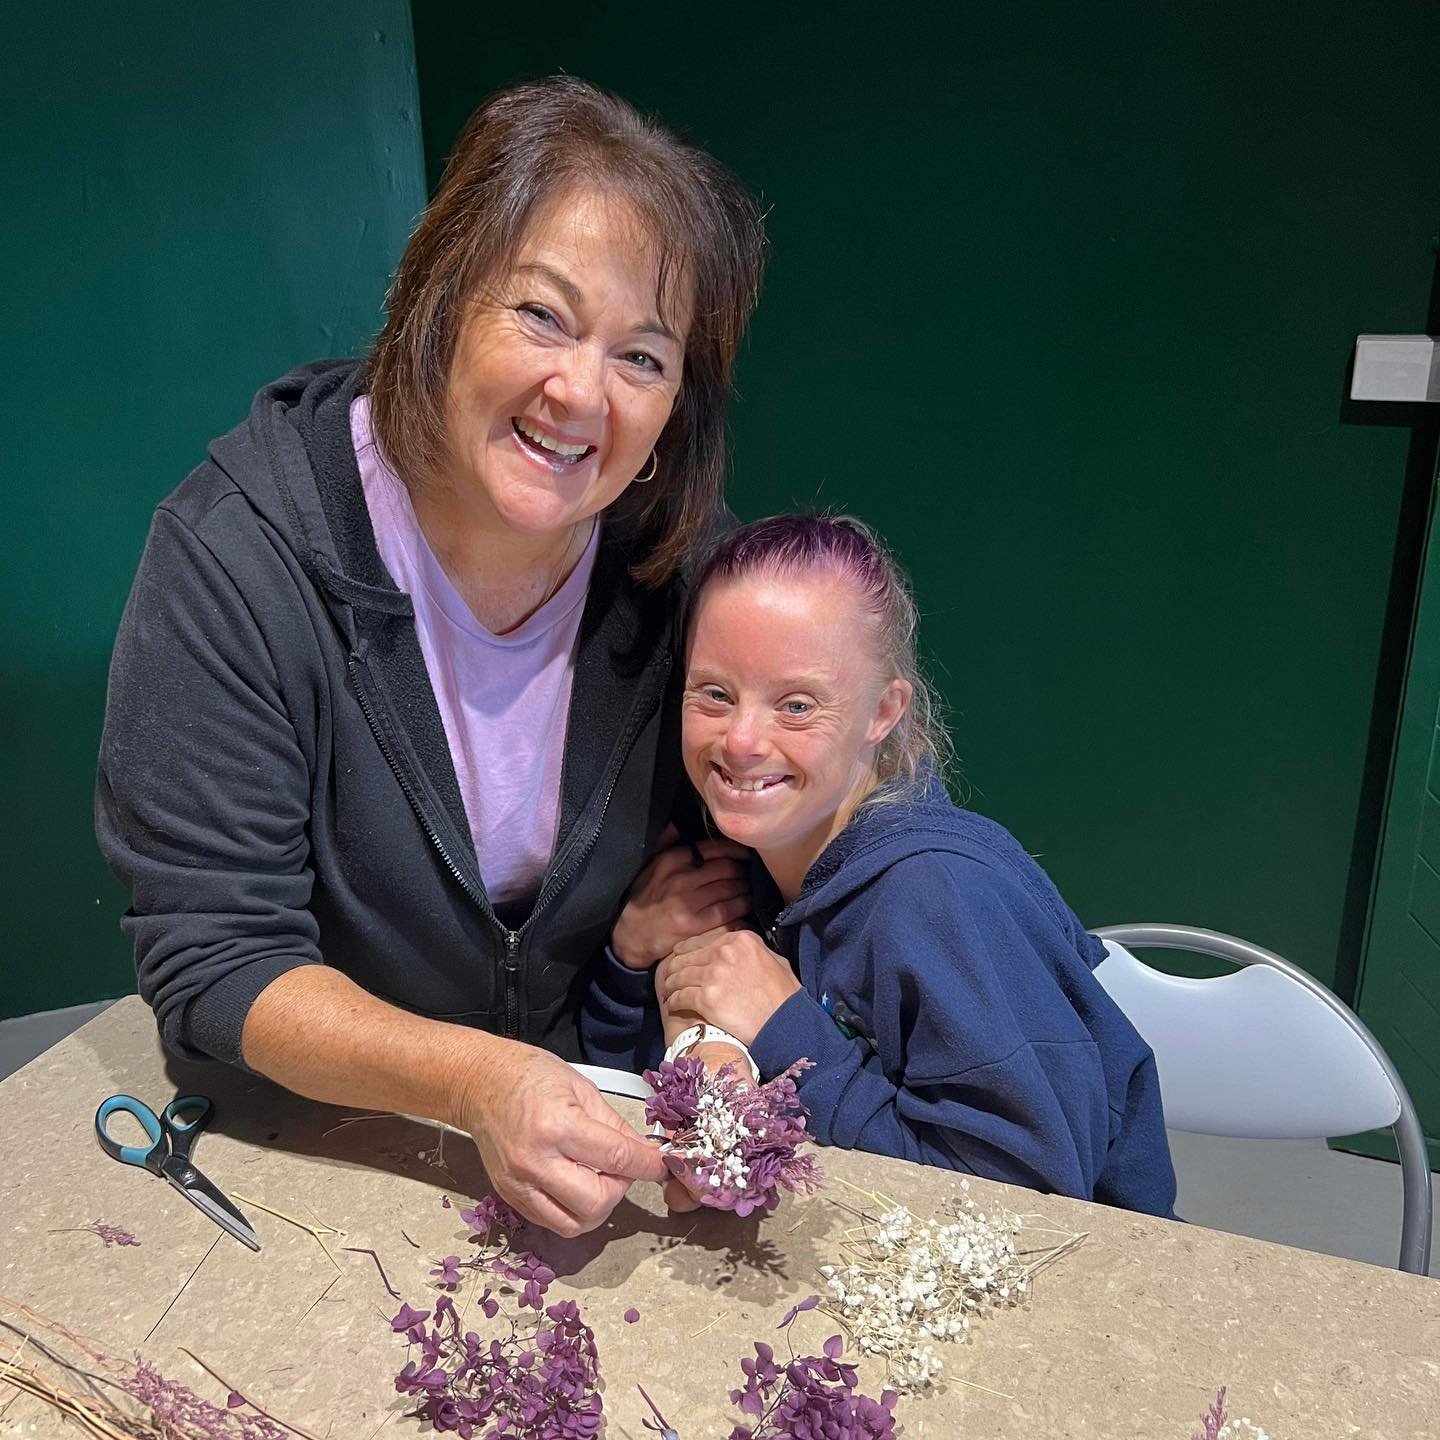 An amazing day creating together at our NDIS supported flower course! The ladies are building their skills, confidence and friendships as they learn the creative and beautiful art of flower design. A job well done!